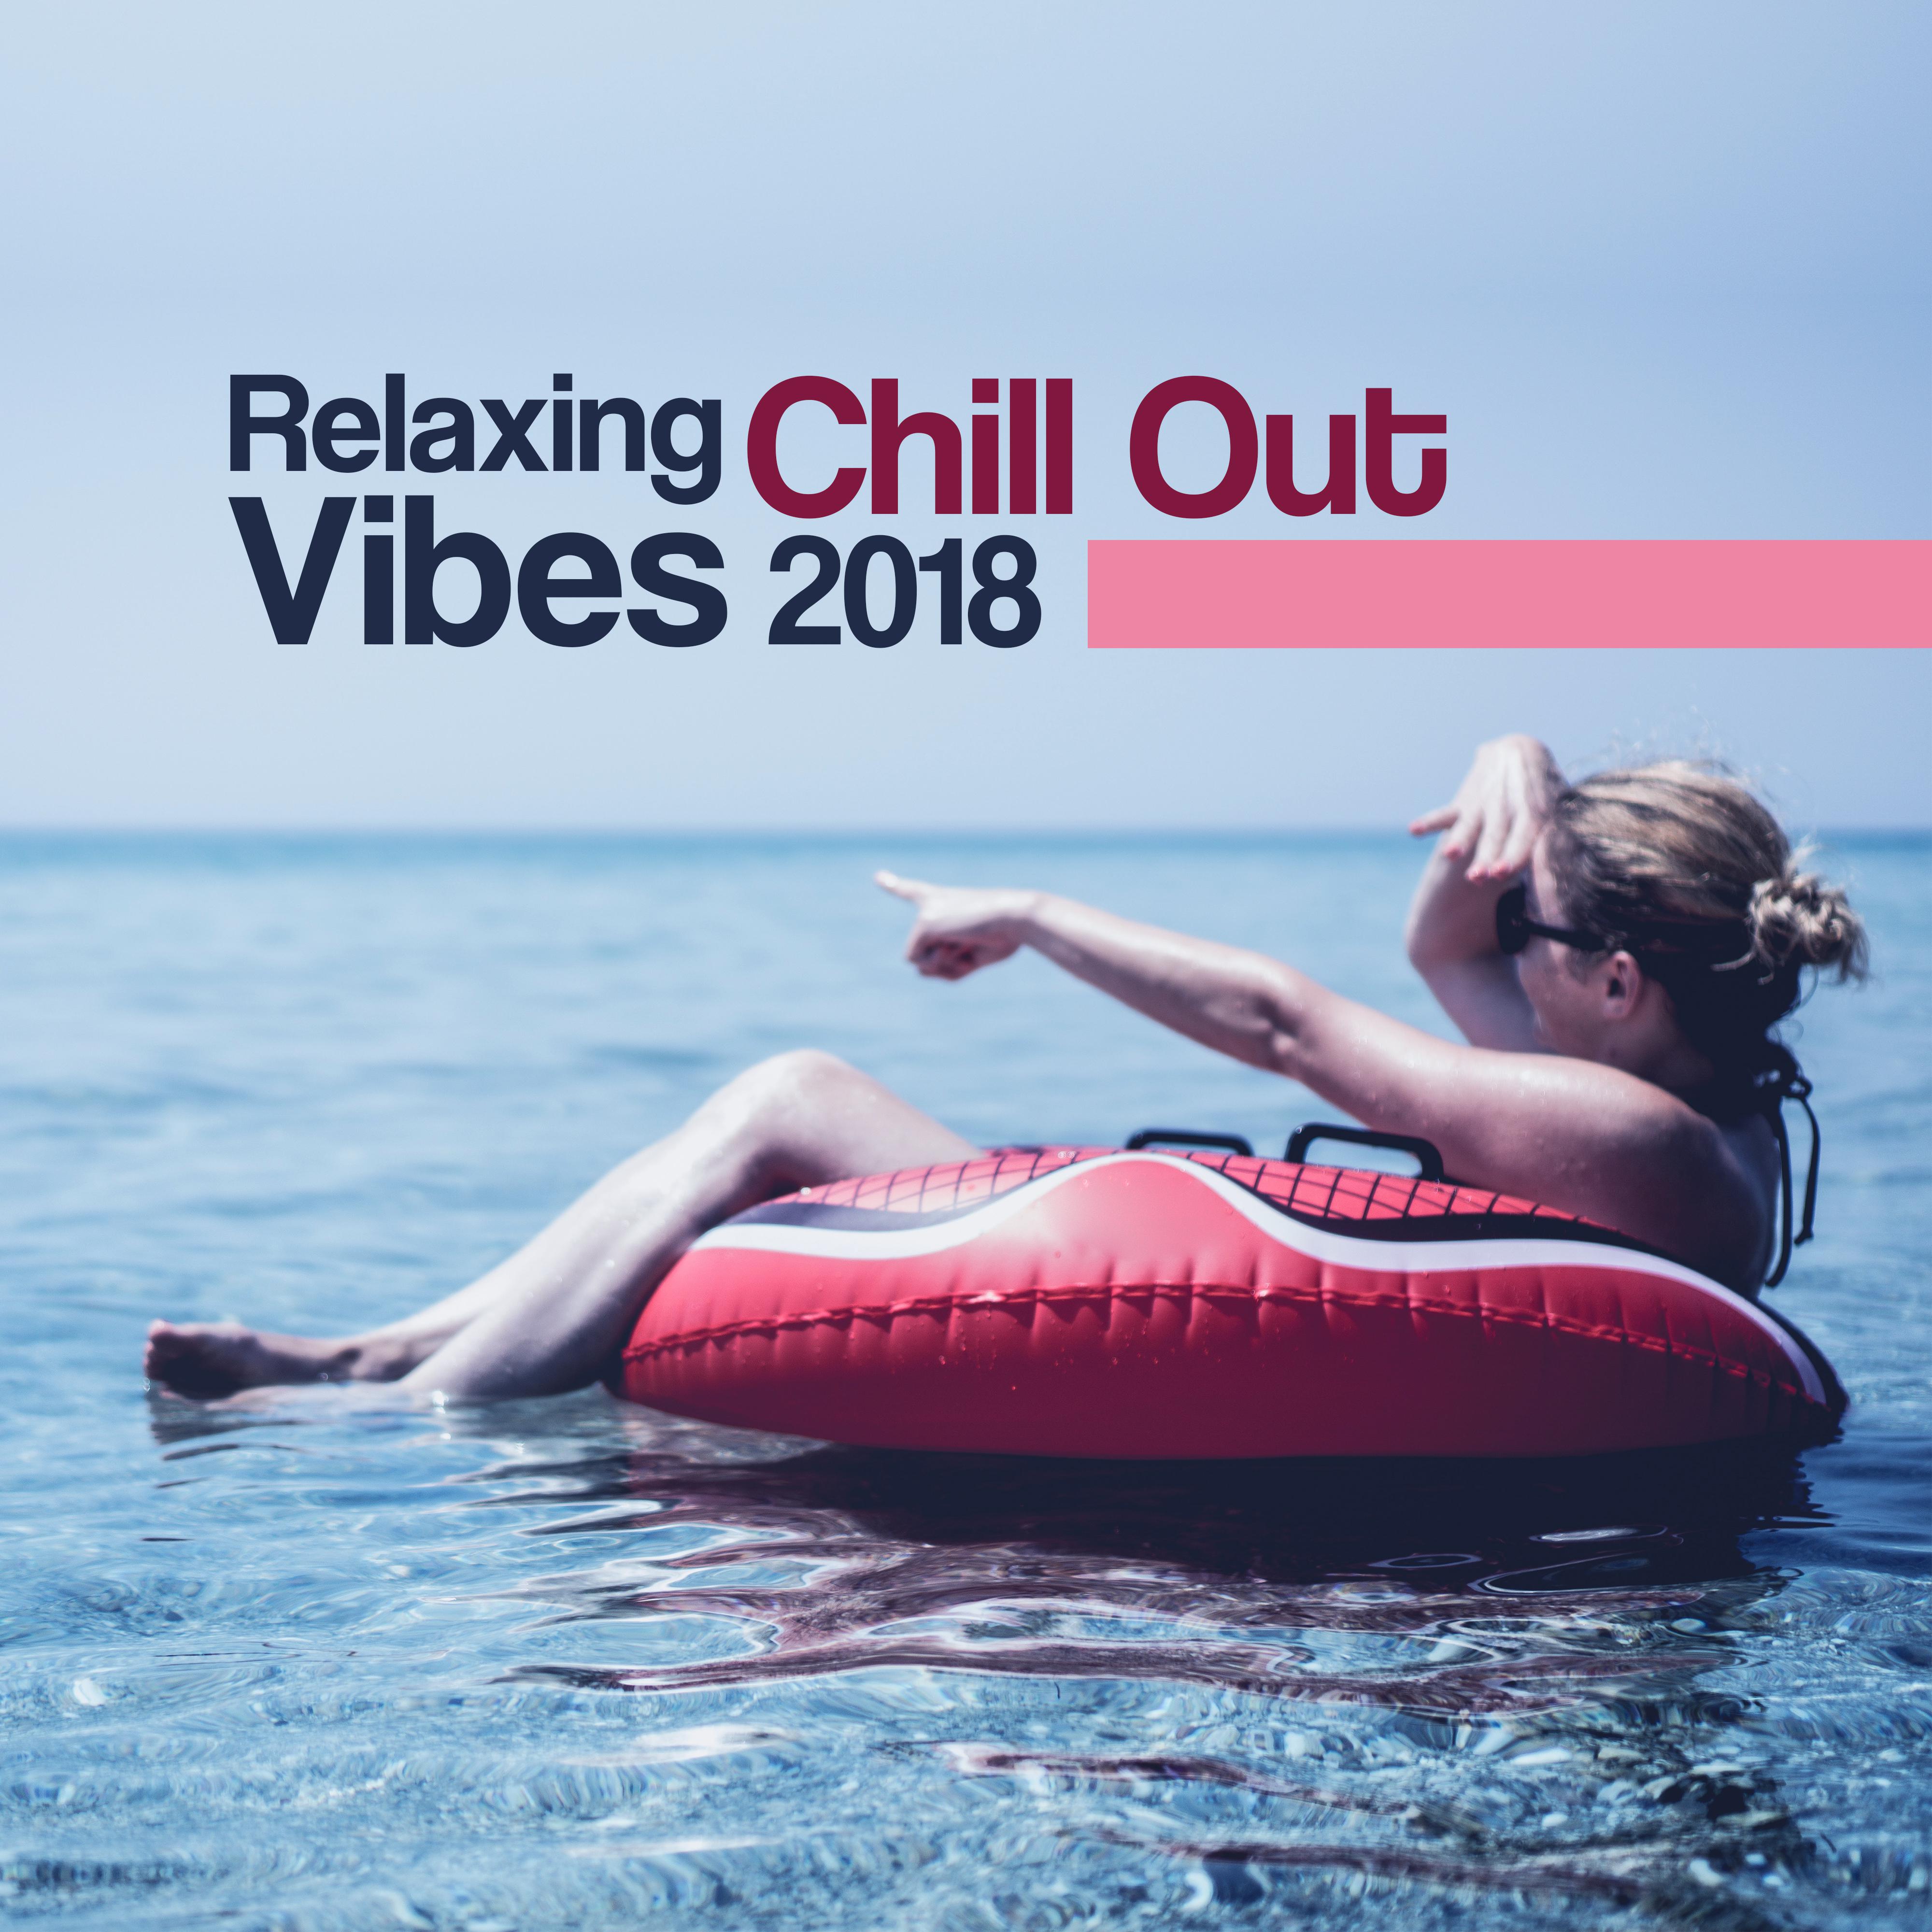 Relaxing Chill Out Vibes 2018